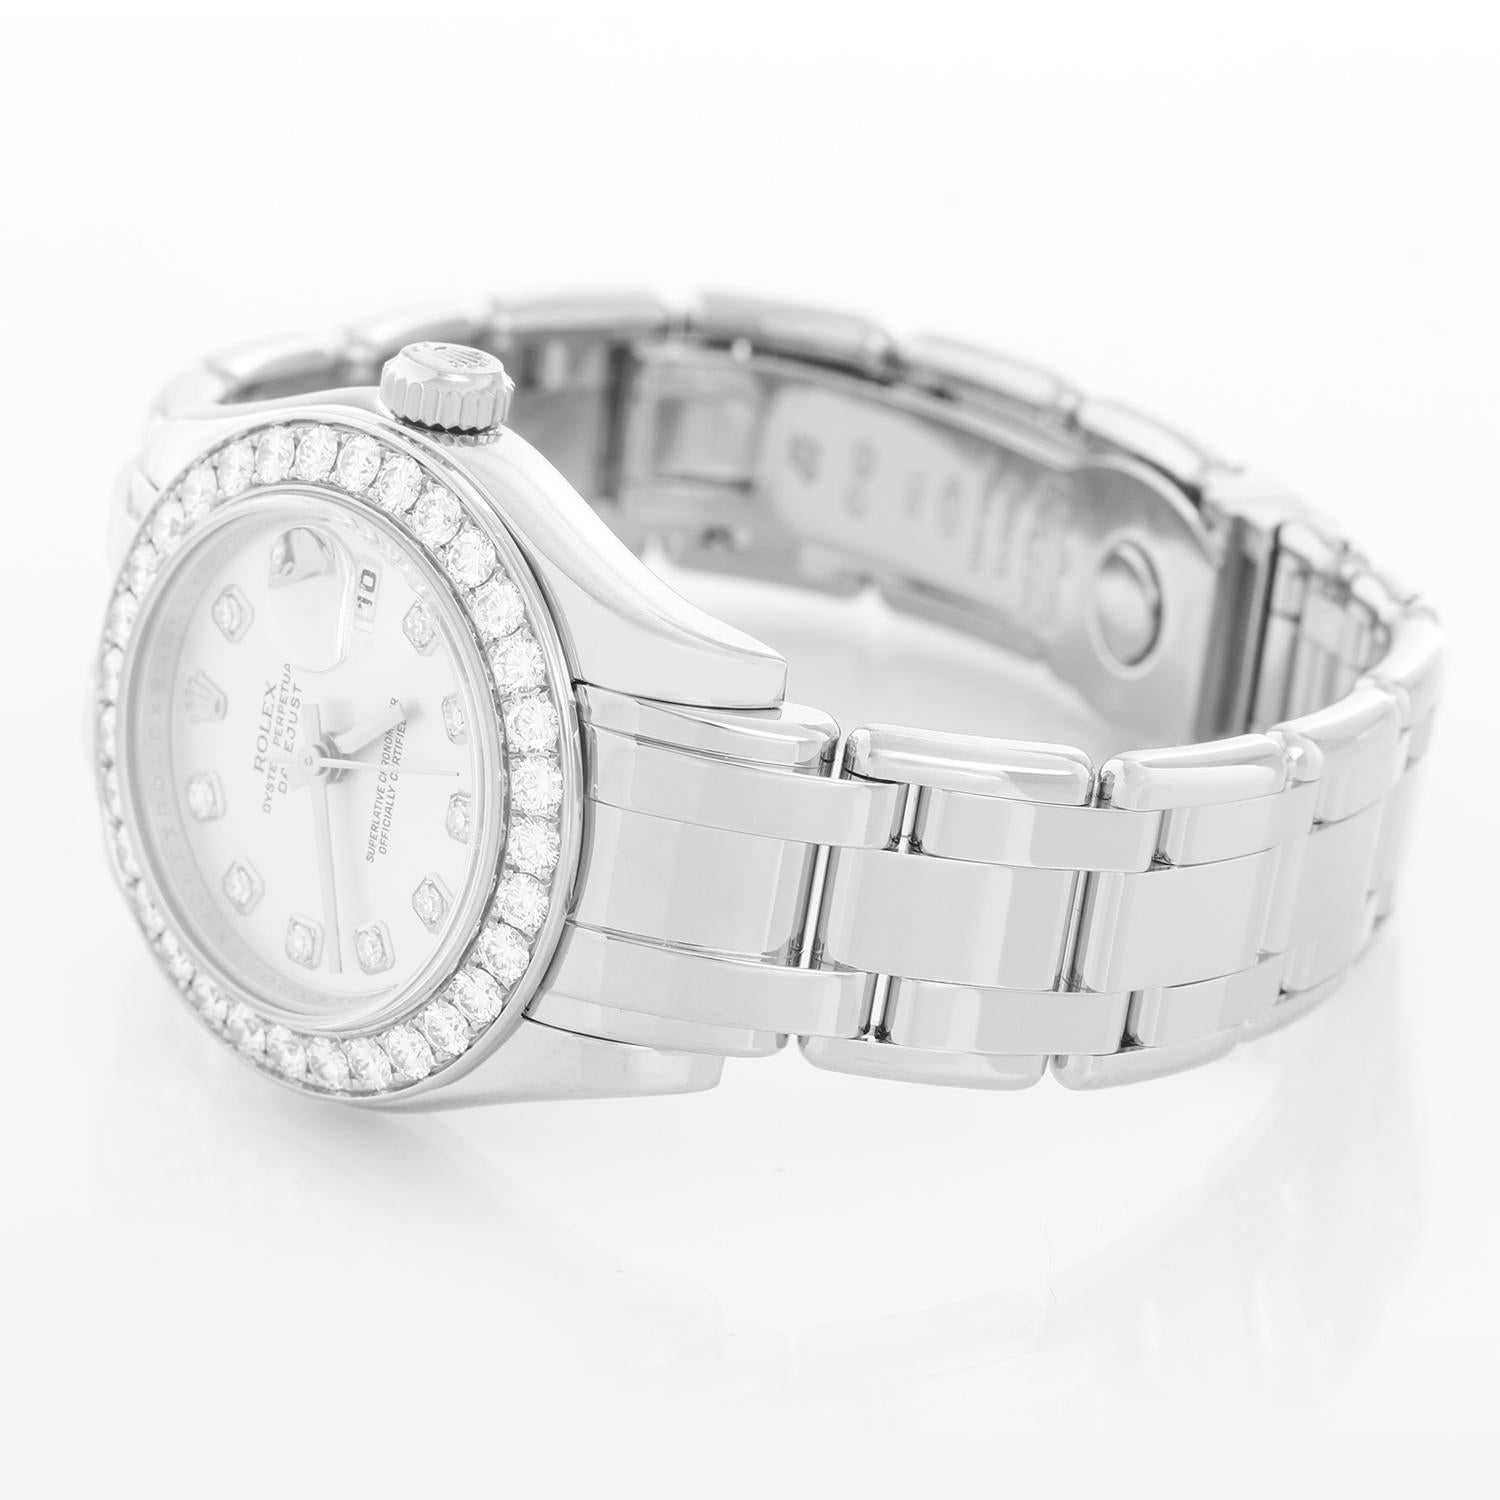 Rolex Ladies Pearlmaster 18k White Gold Watch 80299 Silver Diamond Dial - Automatic winding, 31 jewels, Quickset, sapphire crystal. 18k white gold case with factory 32-diamond bezel (29mm diameter). Rolex silver diamond dial. 18k white gold